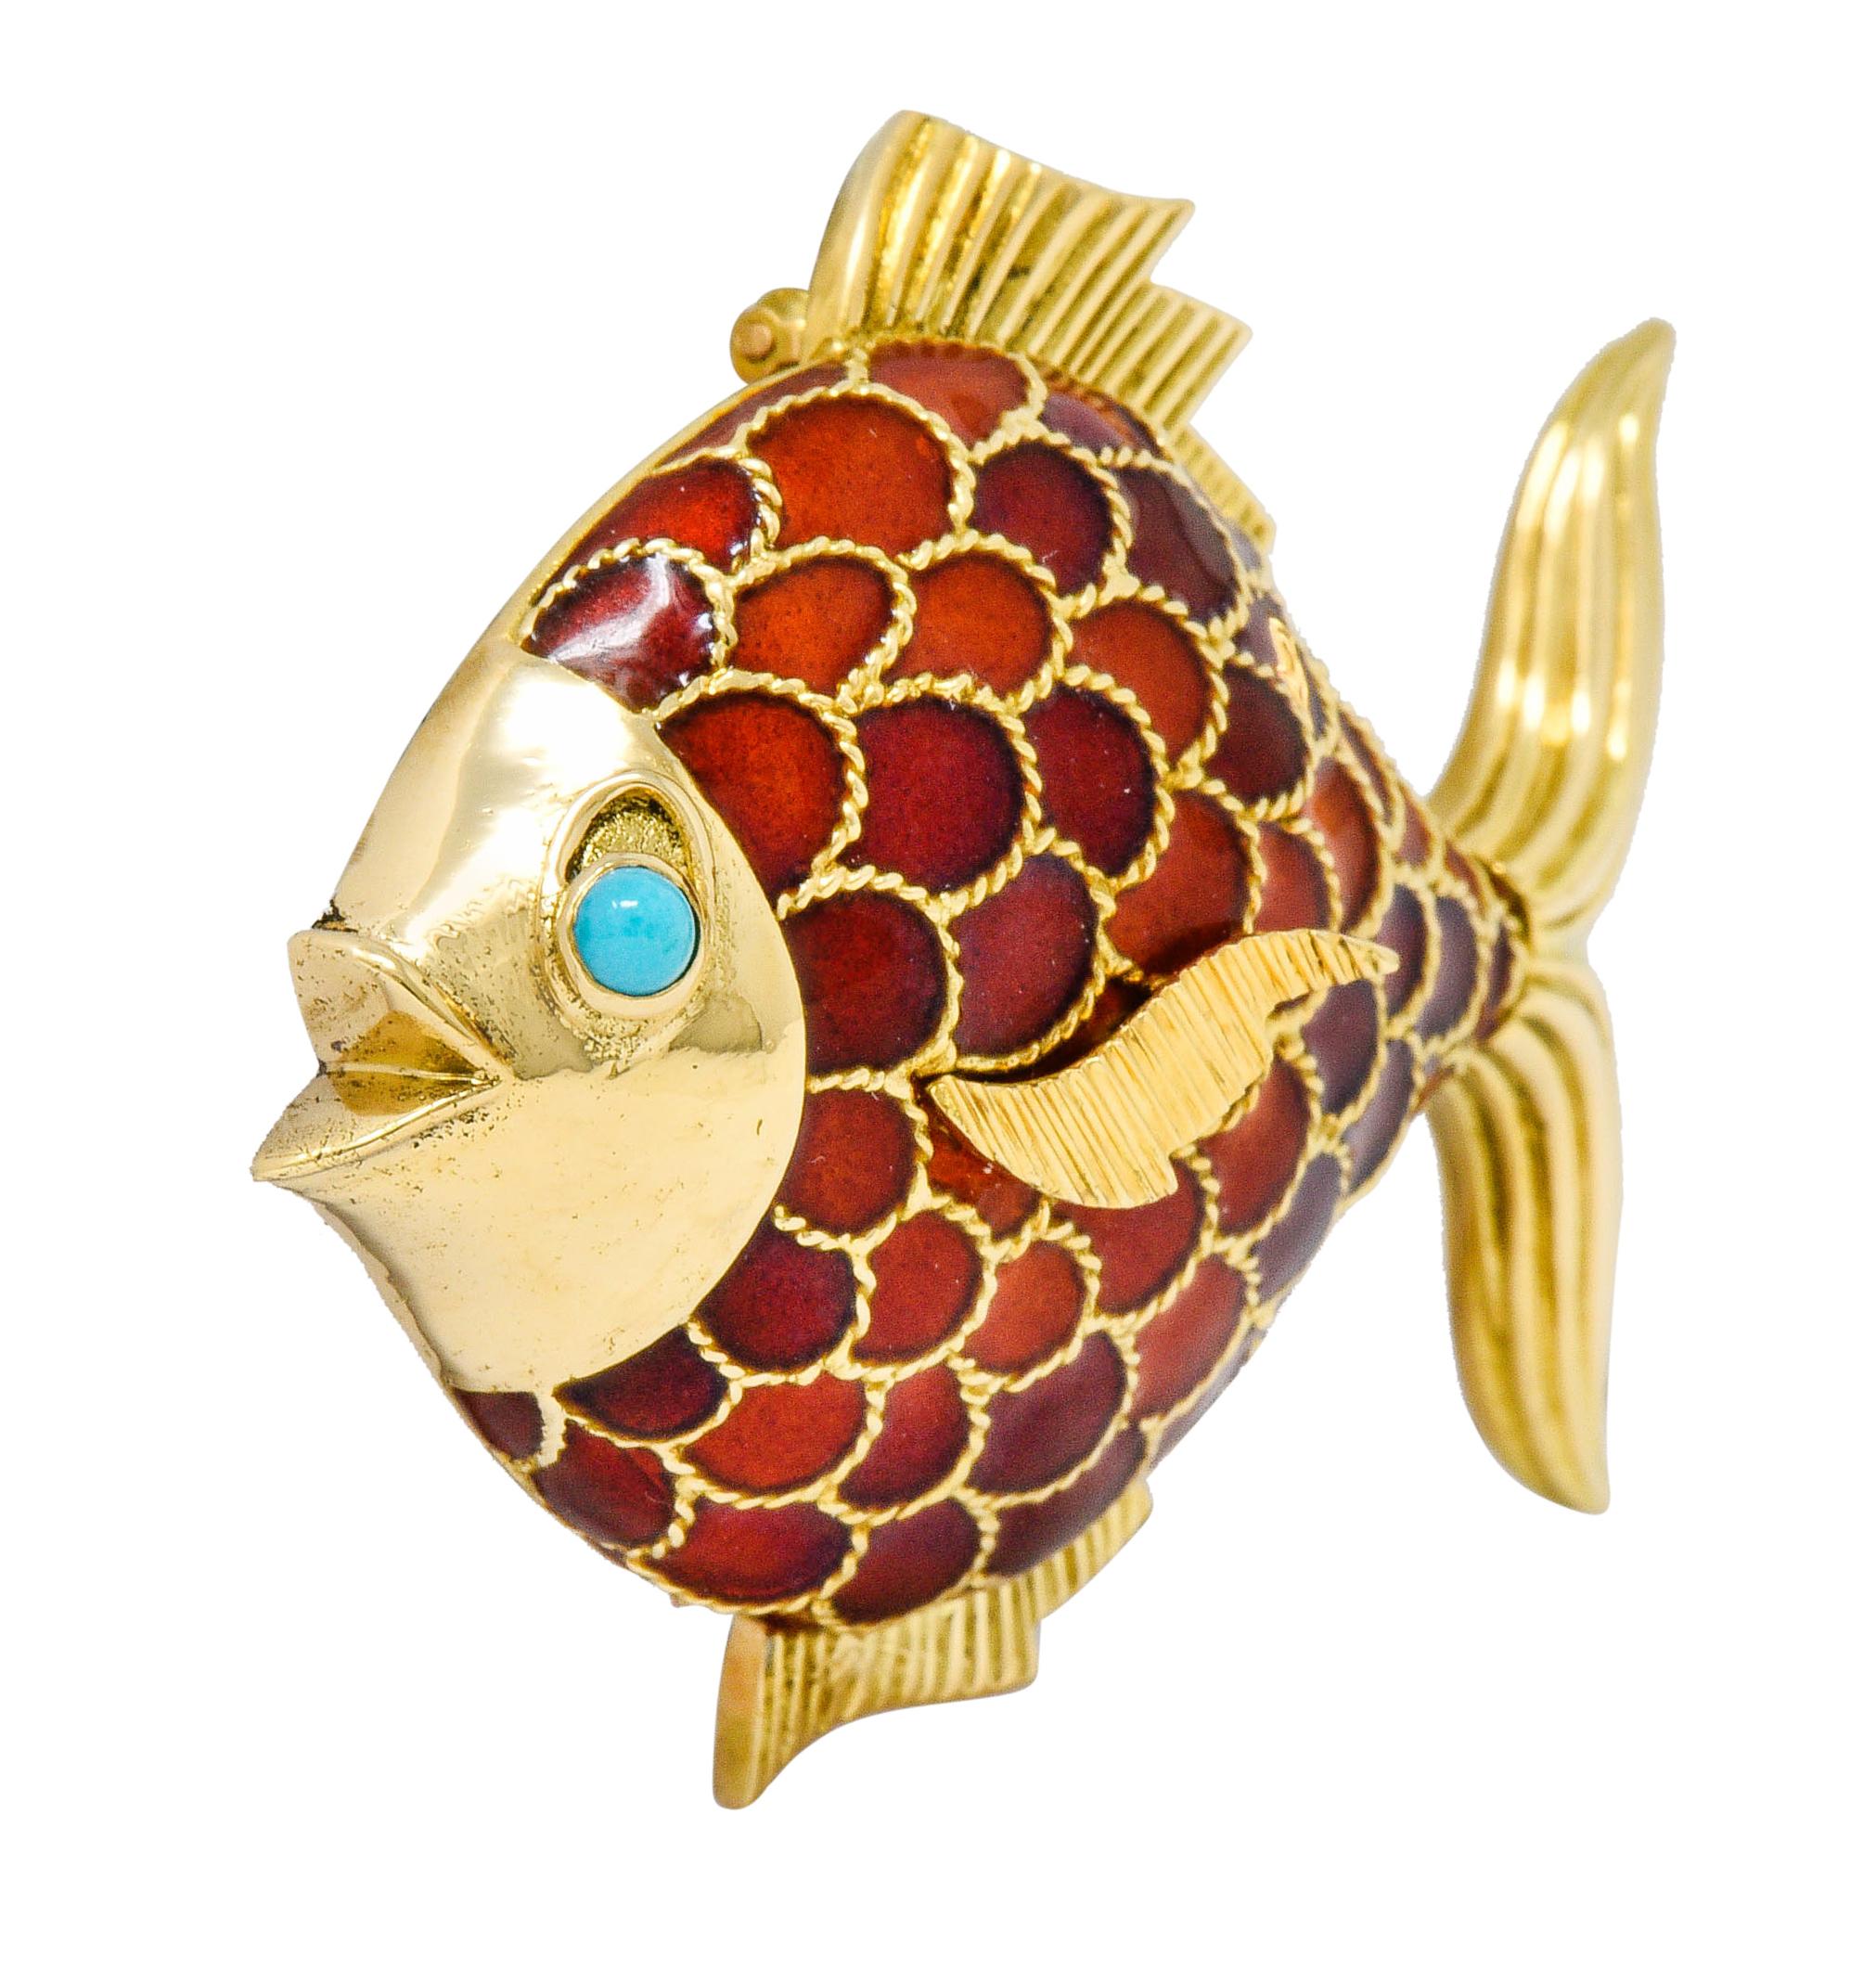 Brooch is designed as an adorable fish with twisted rope motif scales and deeply ribbed fins

Scales are glossed with boldly red to orangey-red enamel with no loss

Accented by a bright greenish-blue 2.8 mm turquoise cabochon eye

Completed by a